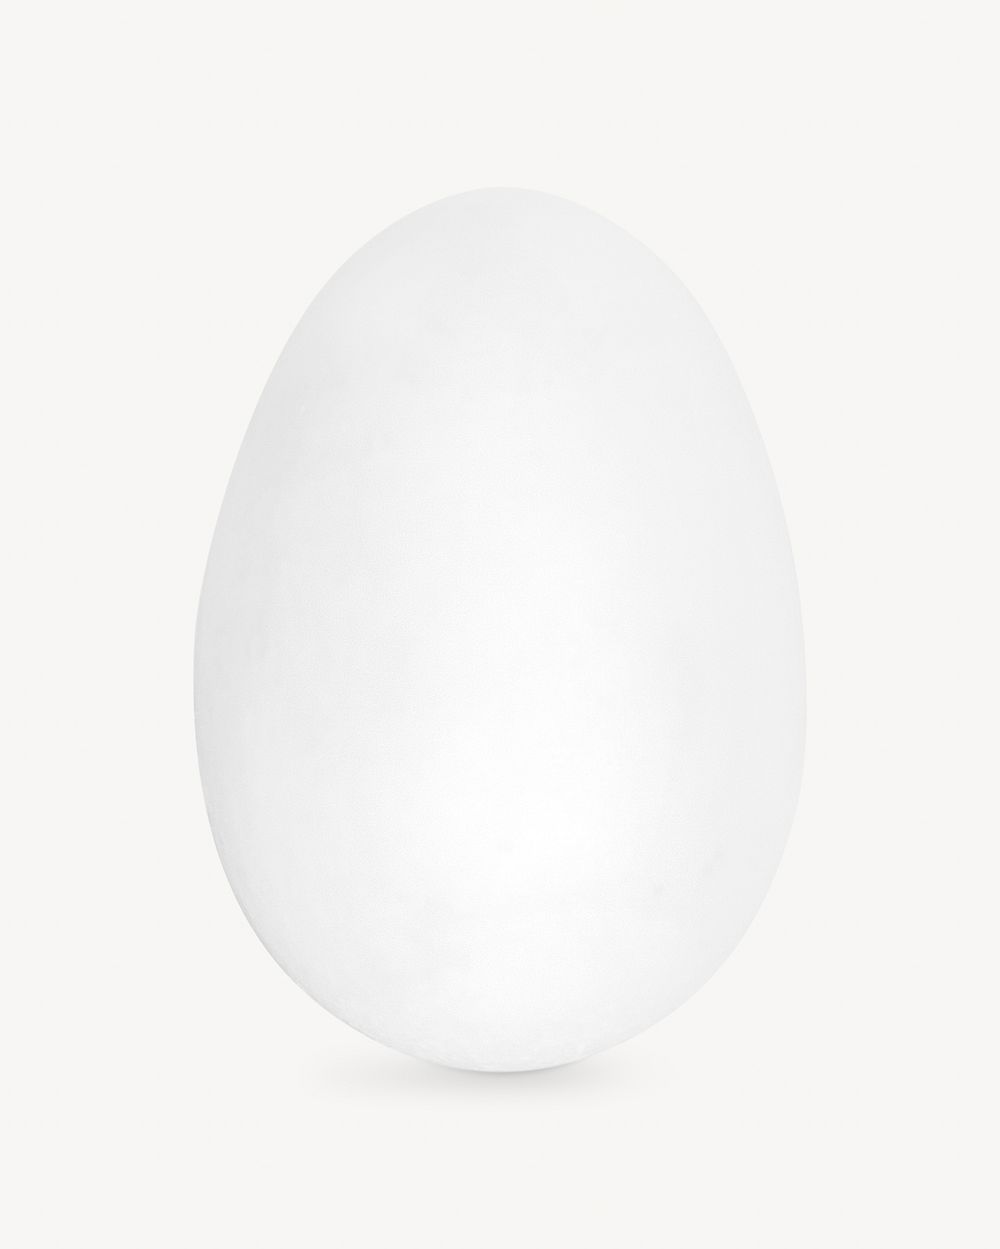 White egg cooking ingredient isolated image